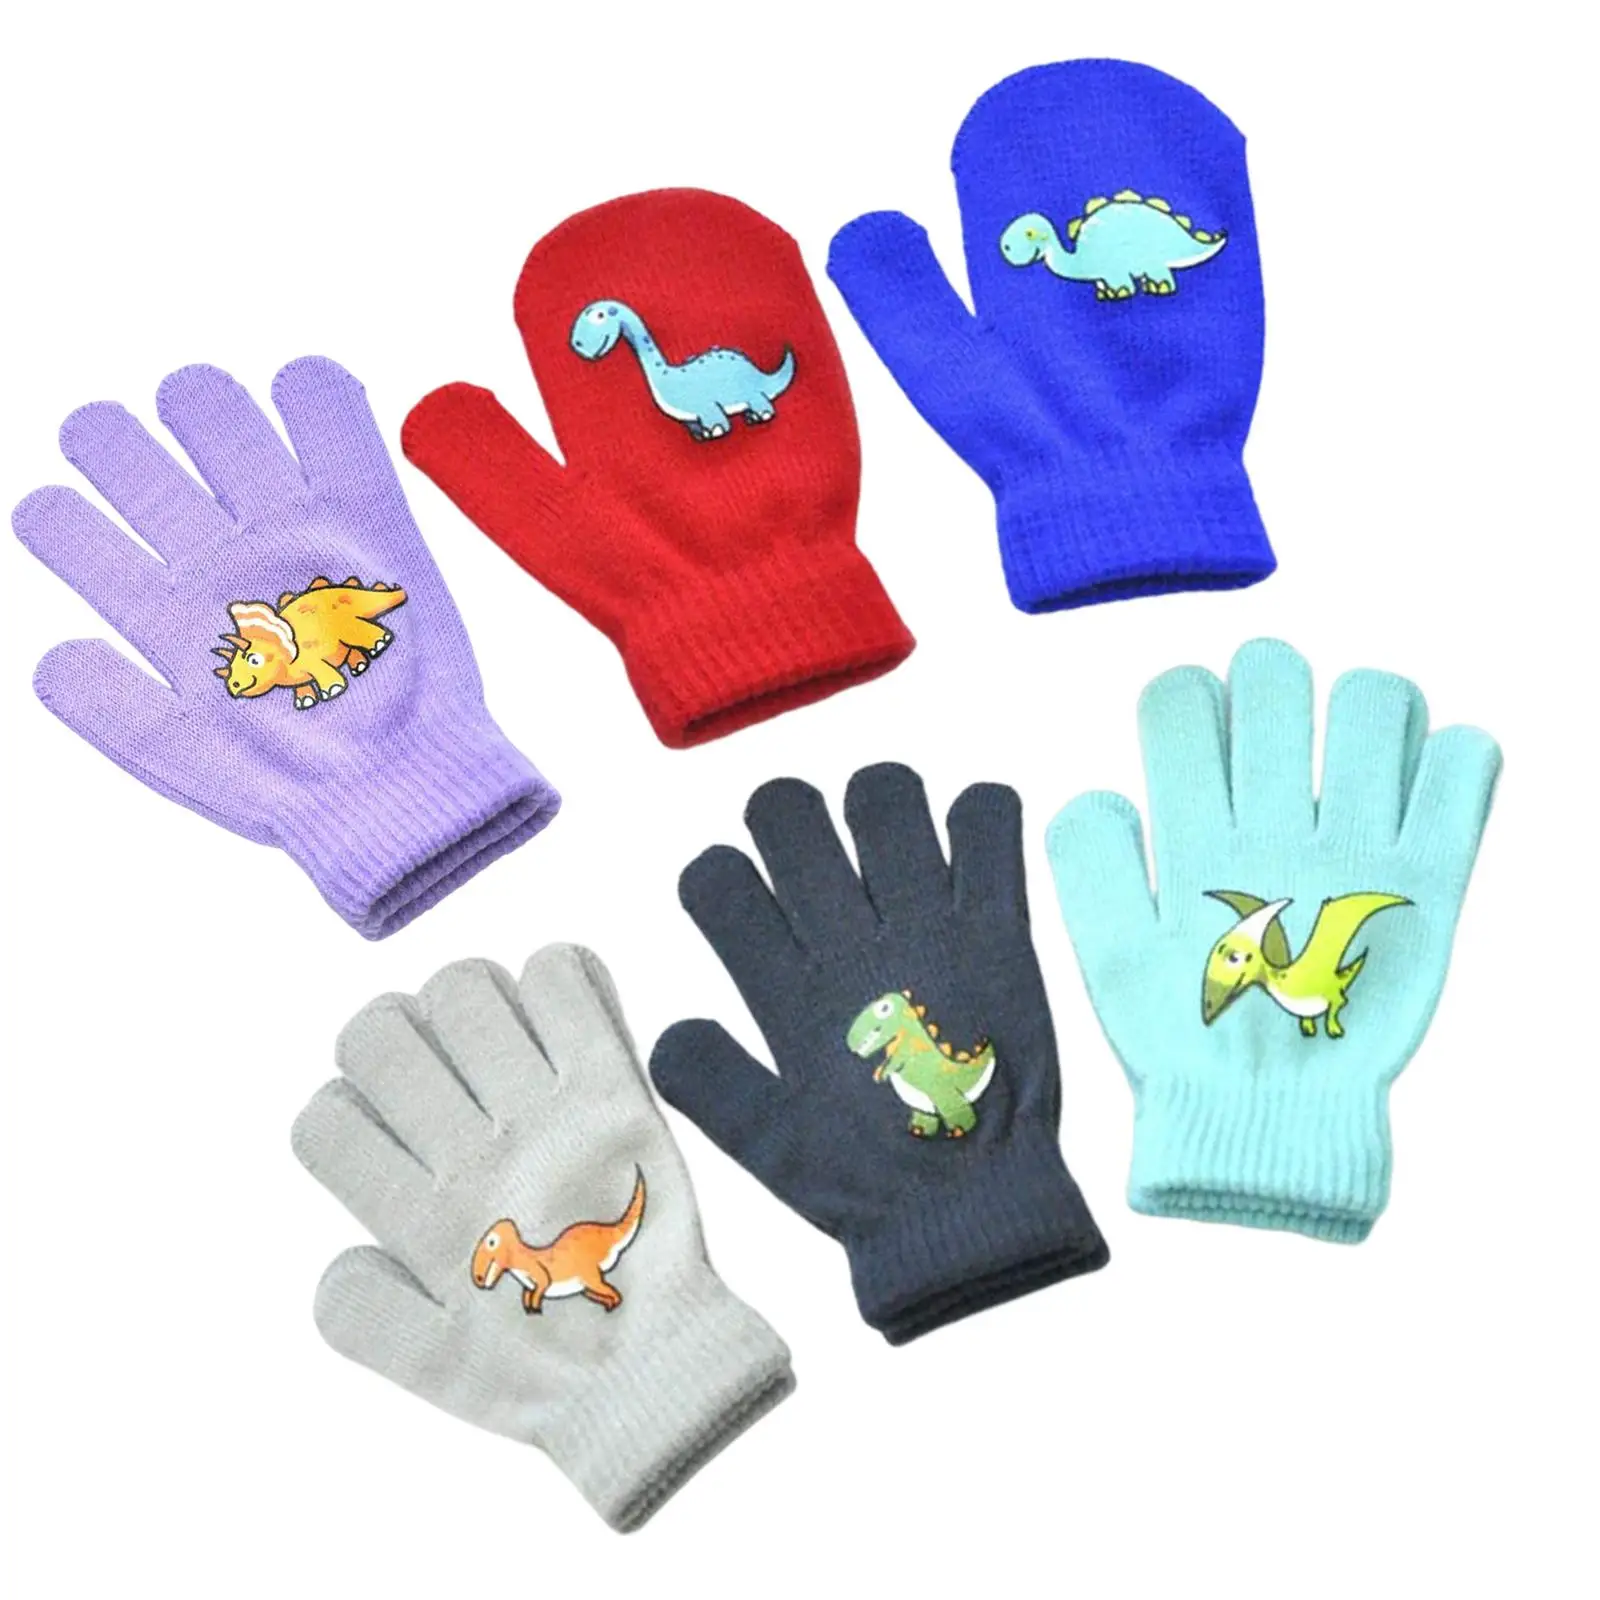 12x Stretchy Warm Knitted Gloves Playing Skating Skiing Kids Gloves Winter